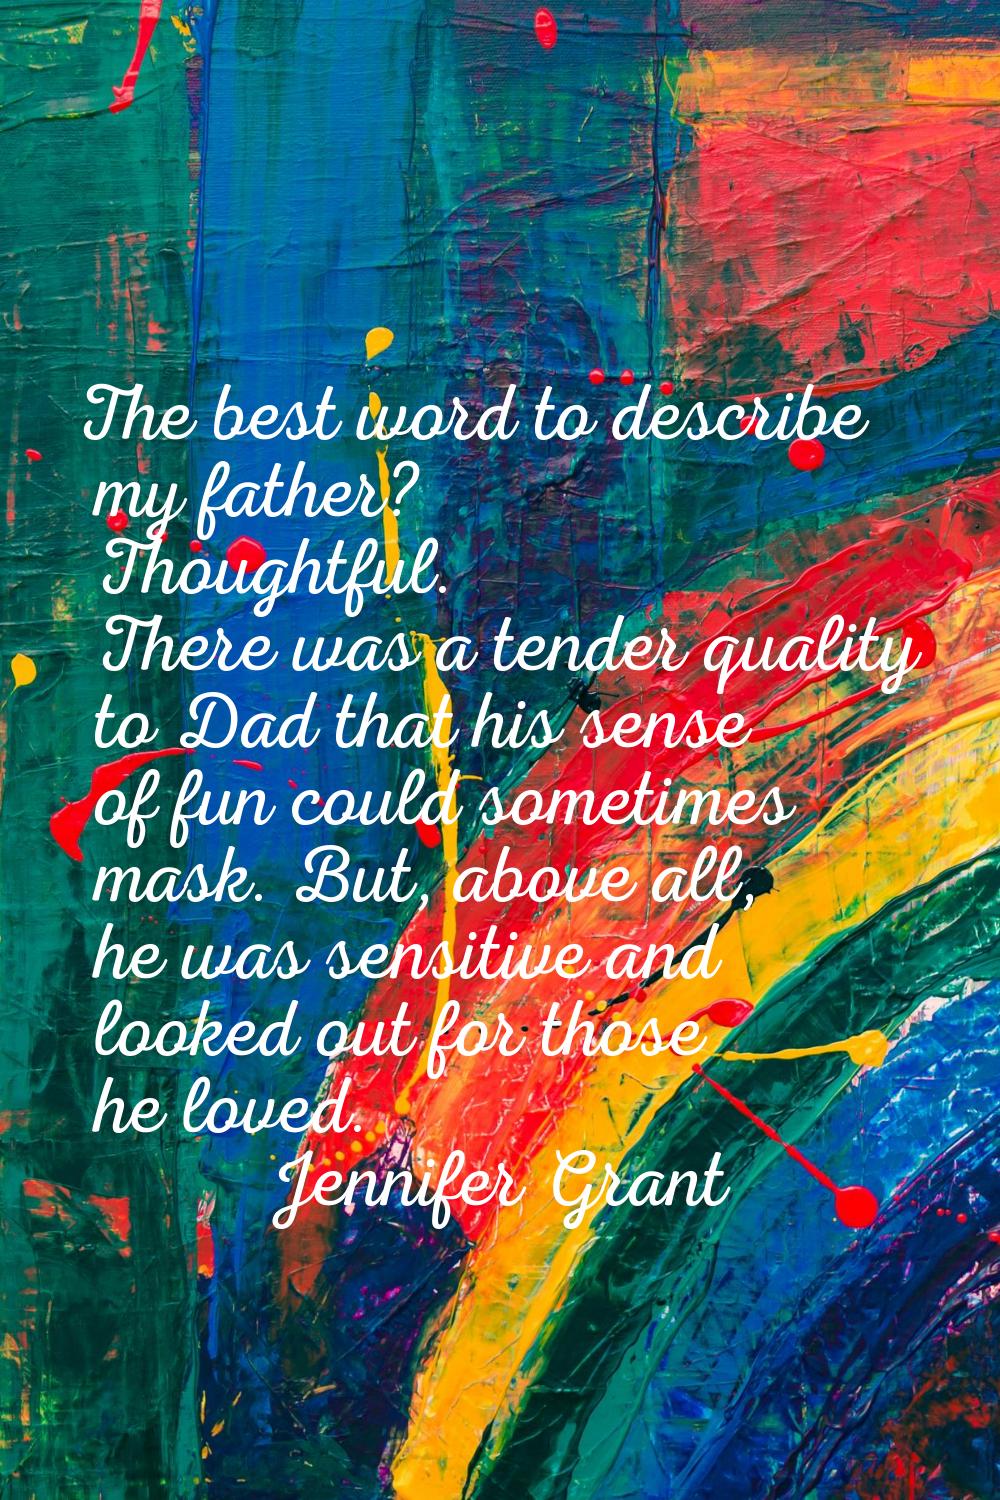 The best word to describe my father? Thoughtful. There was a tender quality to Dad that his sense o